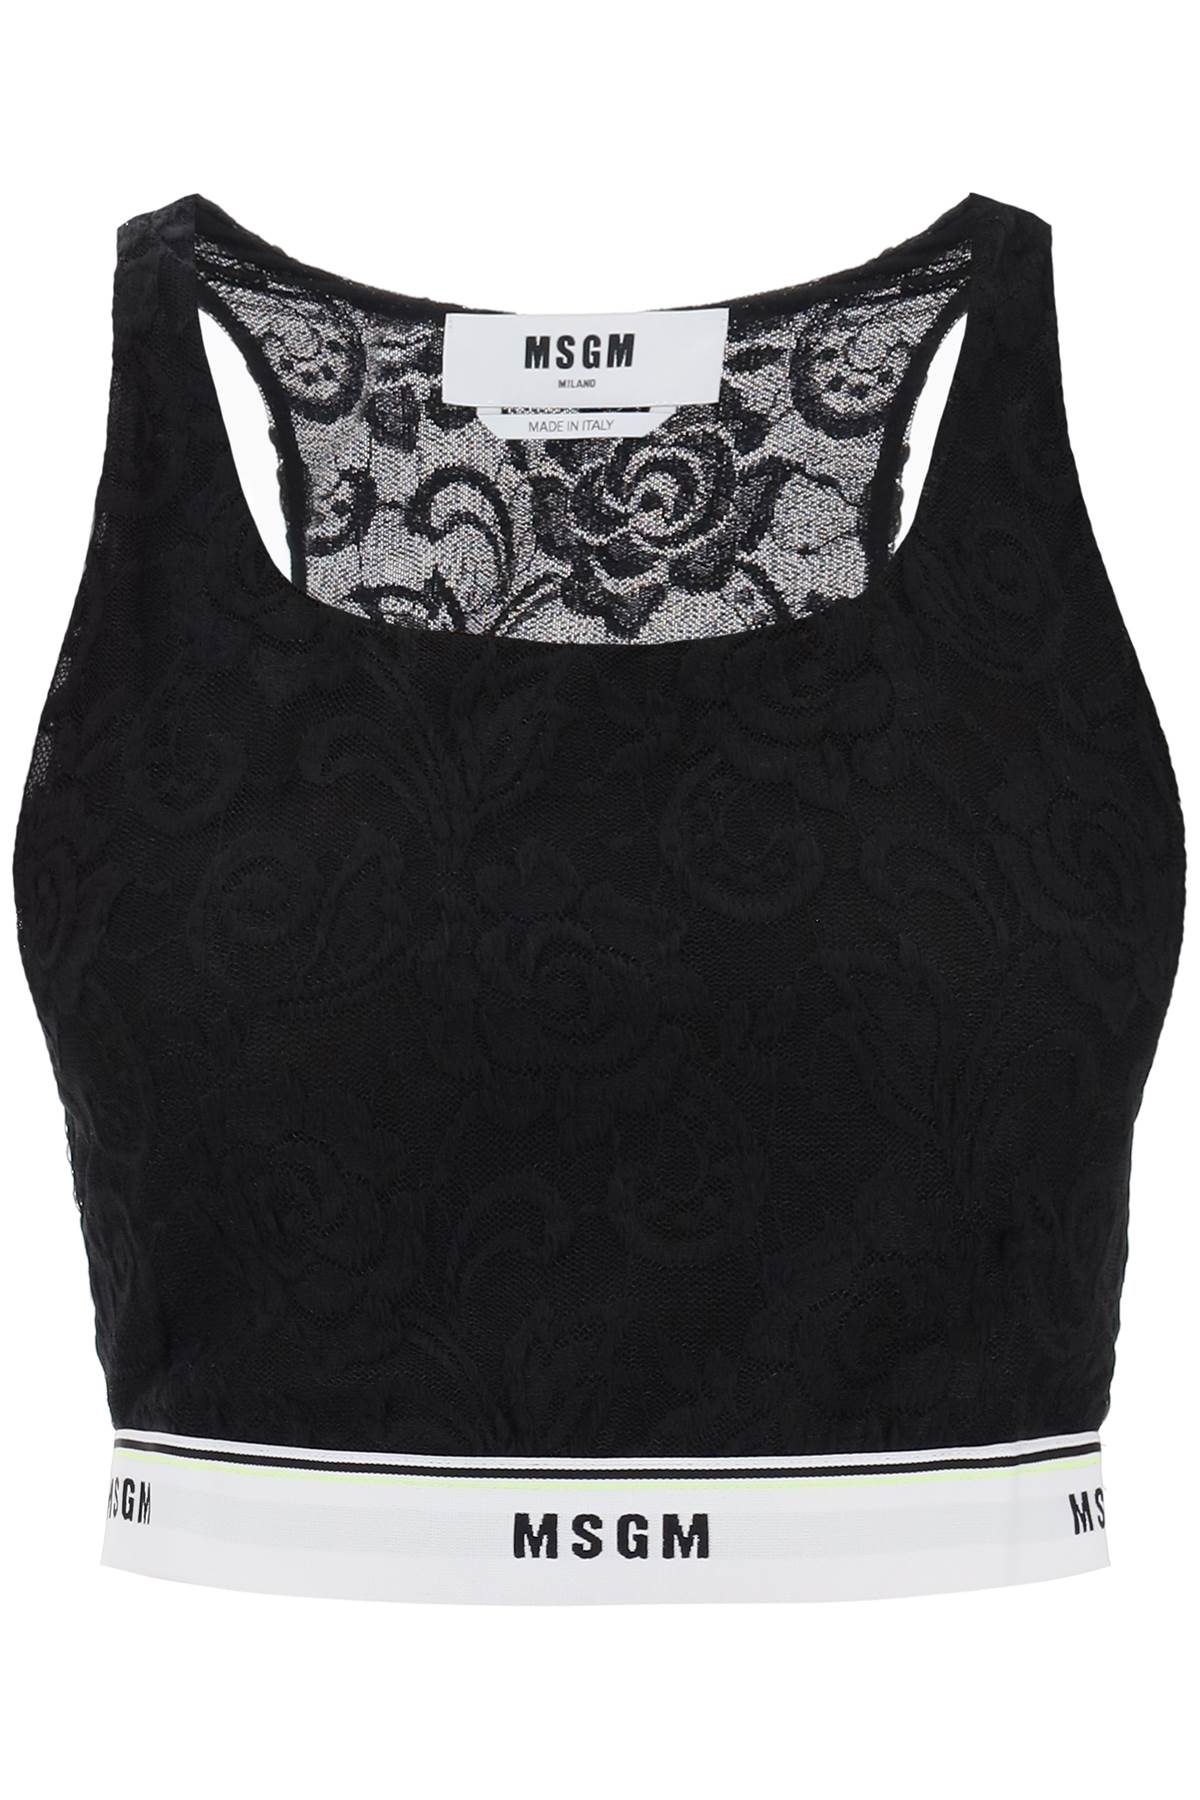 Msgm sports bra in lace with logoed band-0